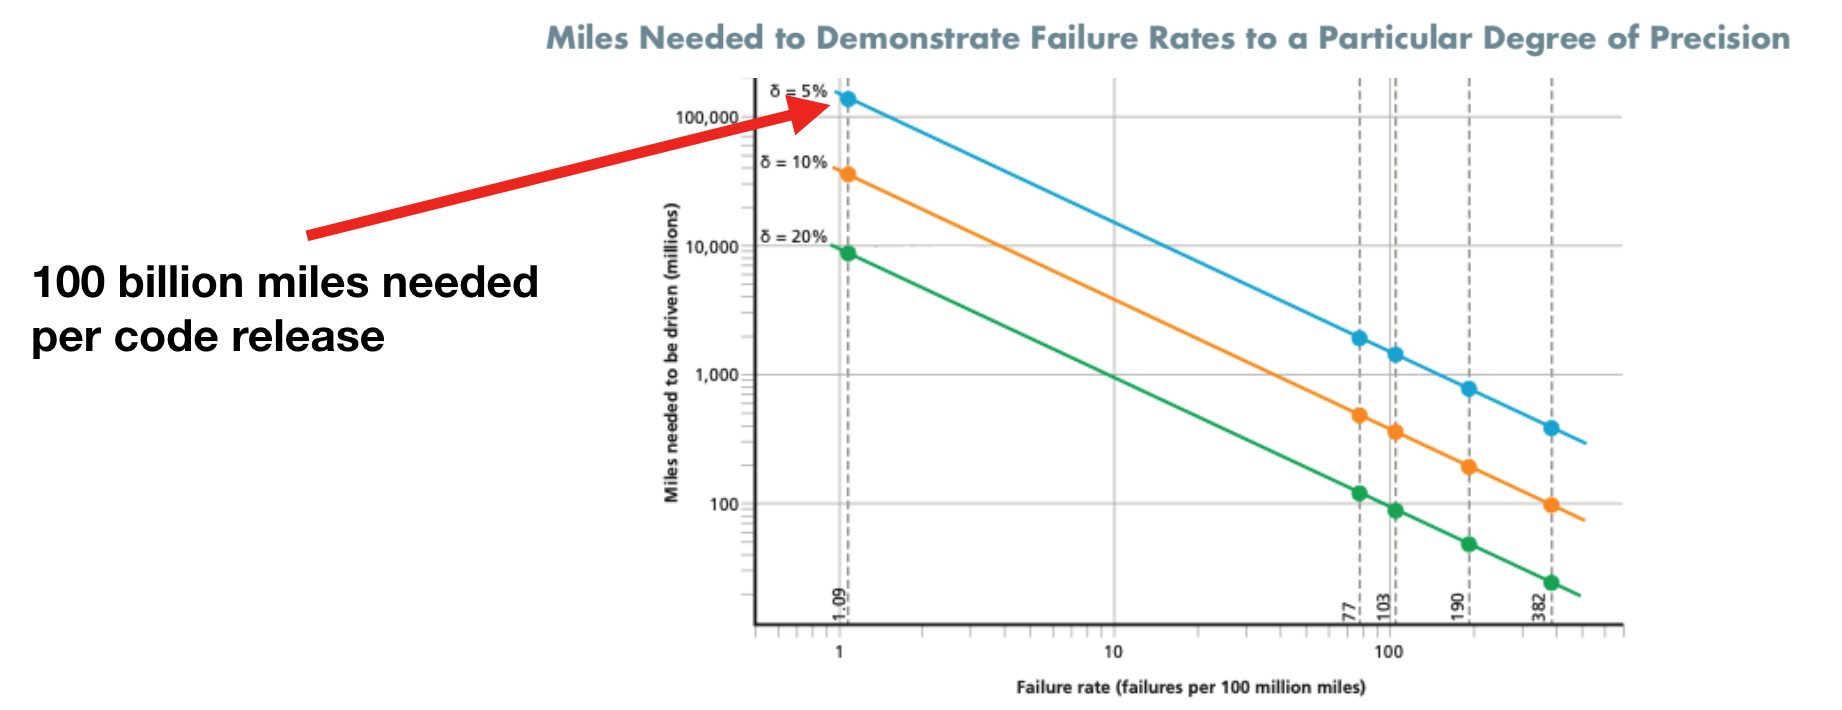 This graph produced by RAND Corporation details the number of miles necessary to statistically validate AV performance relative to human drivers. Due to frequent updates it is impossible to validate such claims via naive Monte Carlo estimates even with industrial-scale cloud computing. [Kalra, 2016]